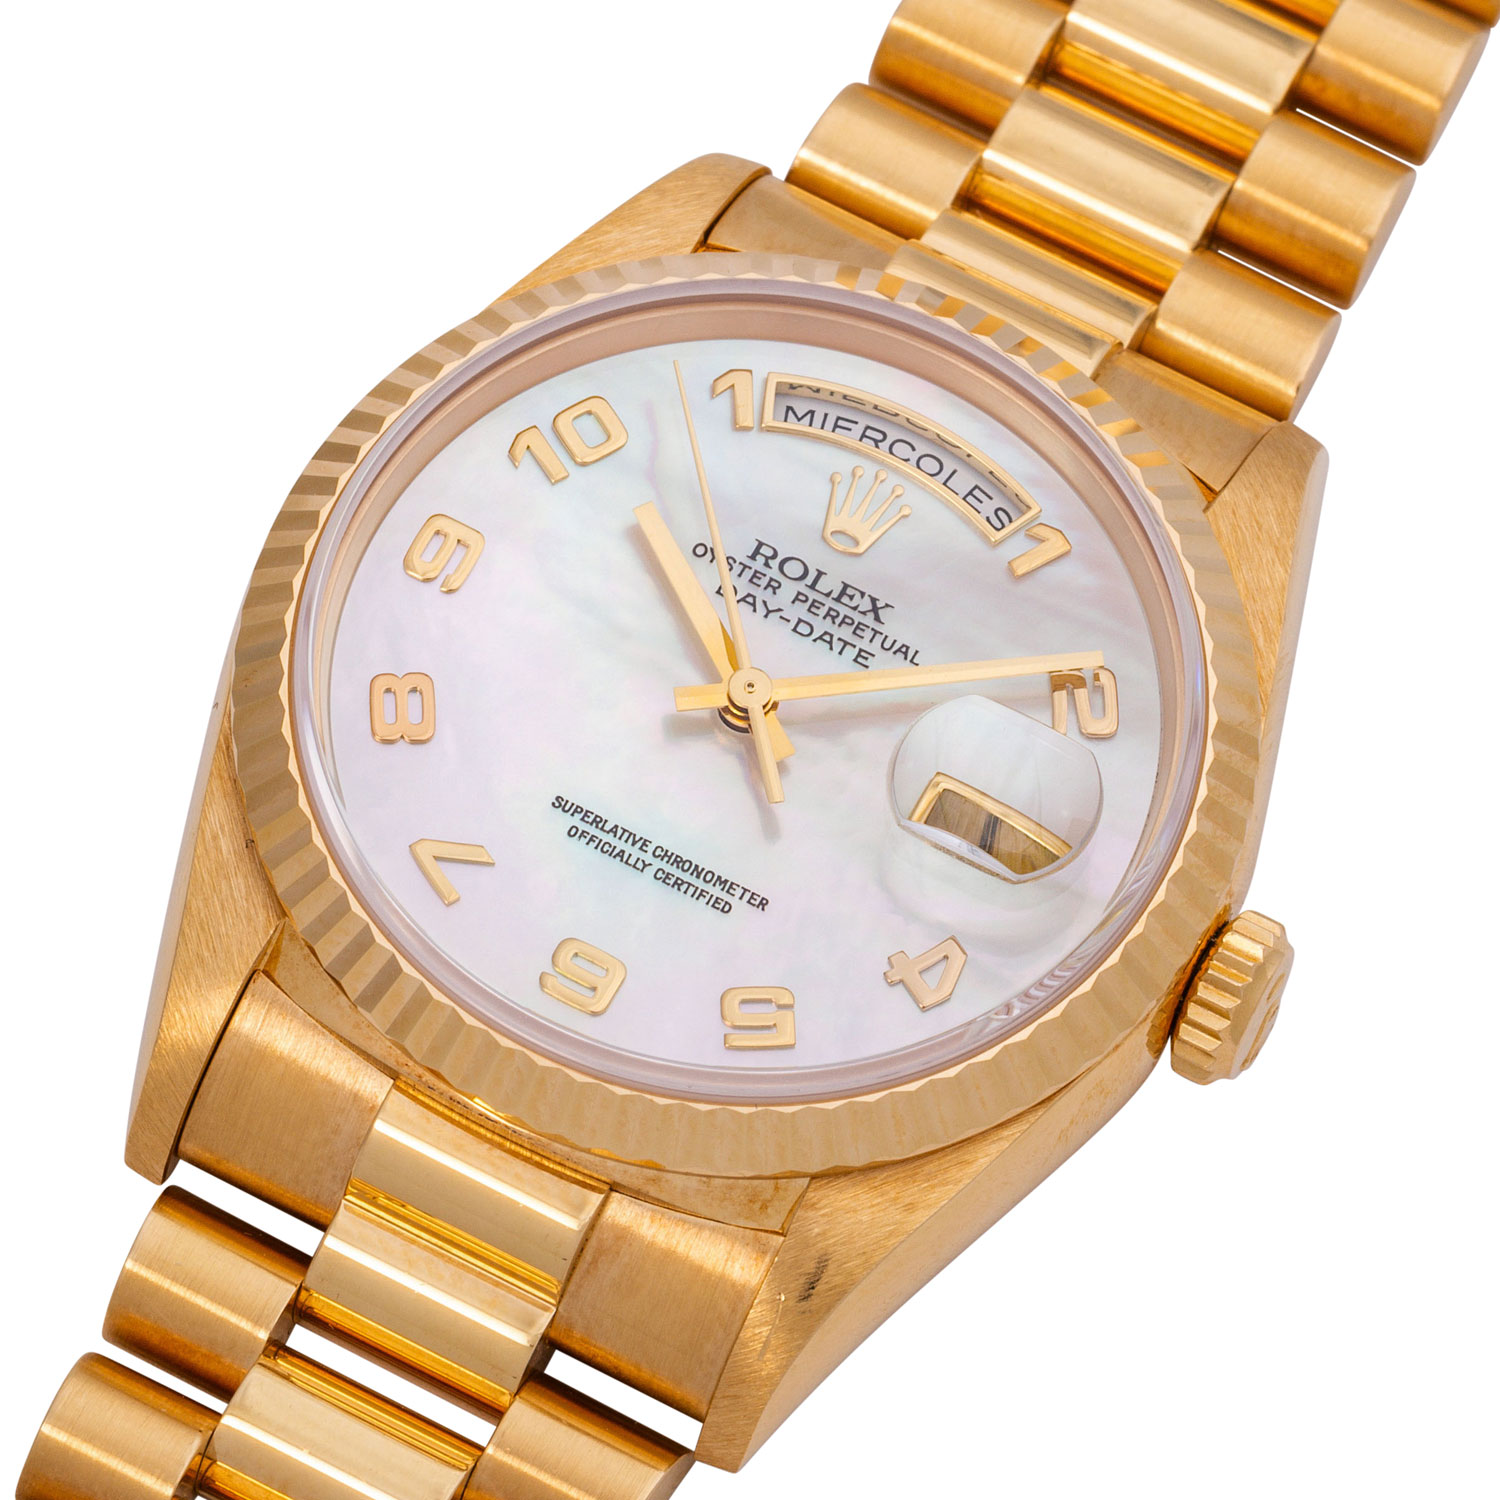 LUXURY AND VINTAGE WATCHES LIVE AUCTION BY EPPLI - MondaniWeb